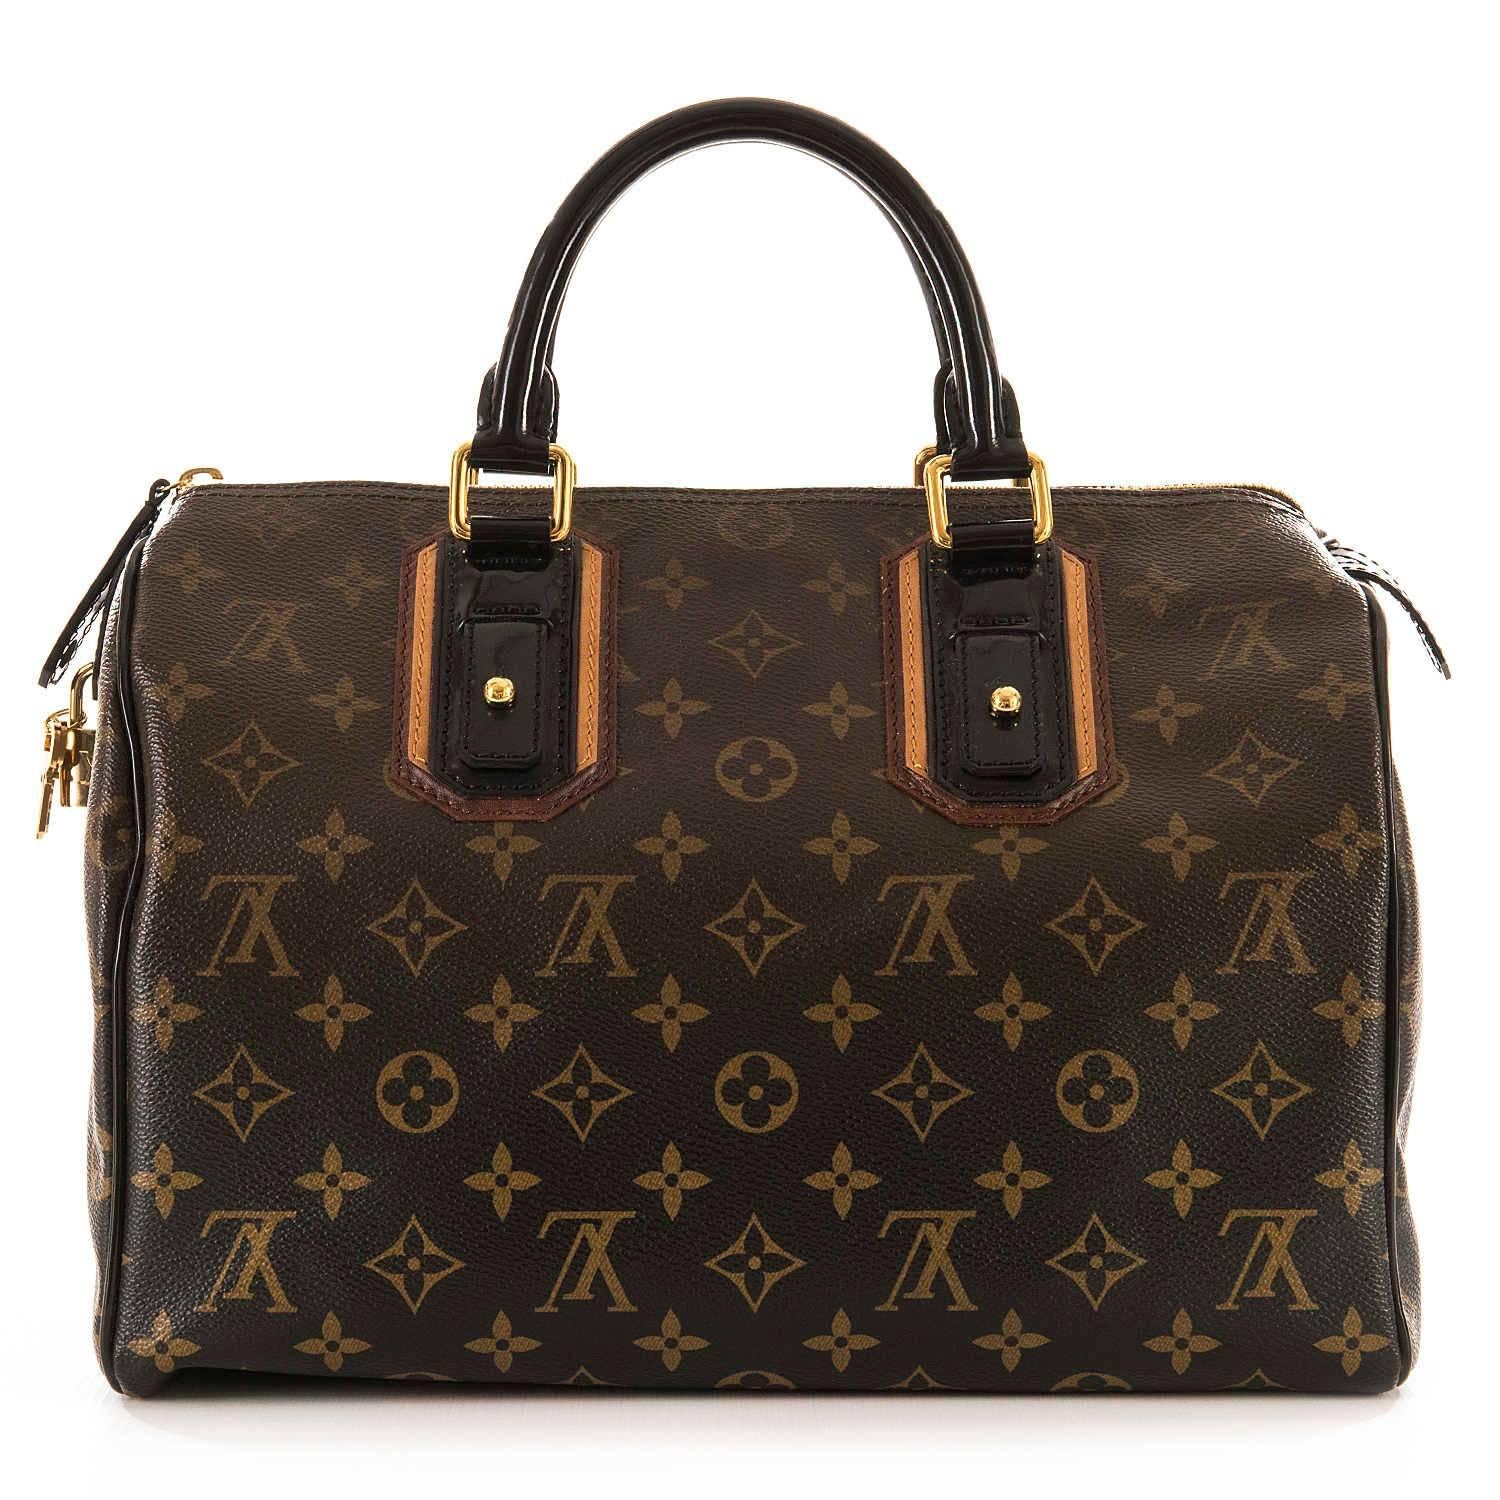 A completely 'Store-fresh' Rare Limited Edition Louis Vuitton 'Sac Mirage' Speedy 30cm. This fabulous bag is finished in a graded LV monogram Toile, trimmed with Tan and Natural leather, accented with Black Patent leather, complemented with Gold